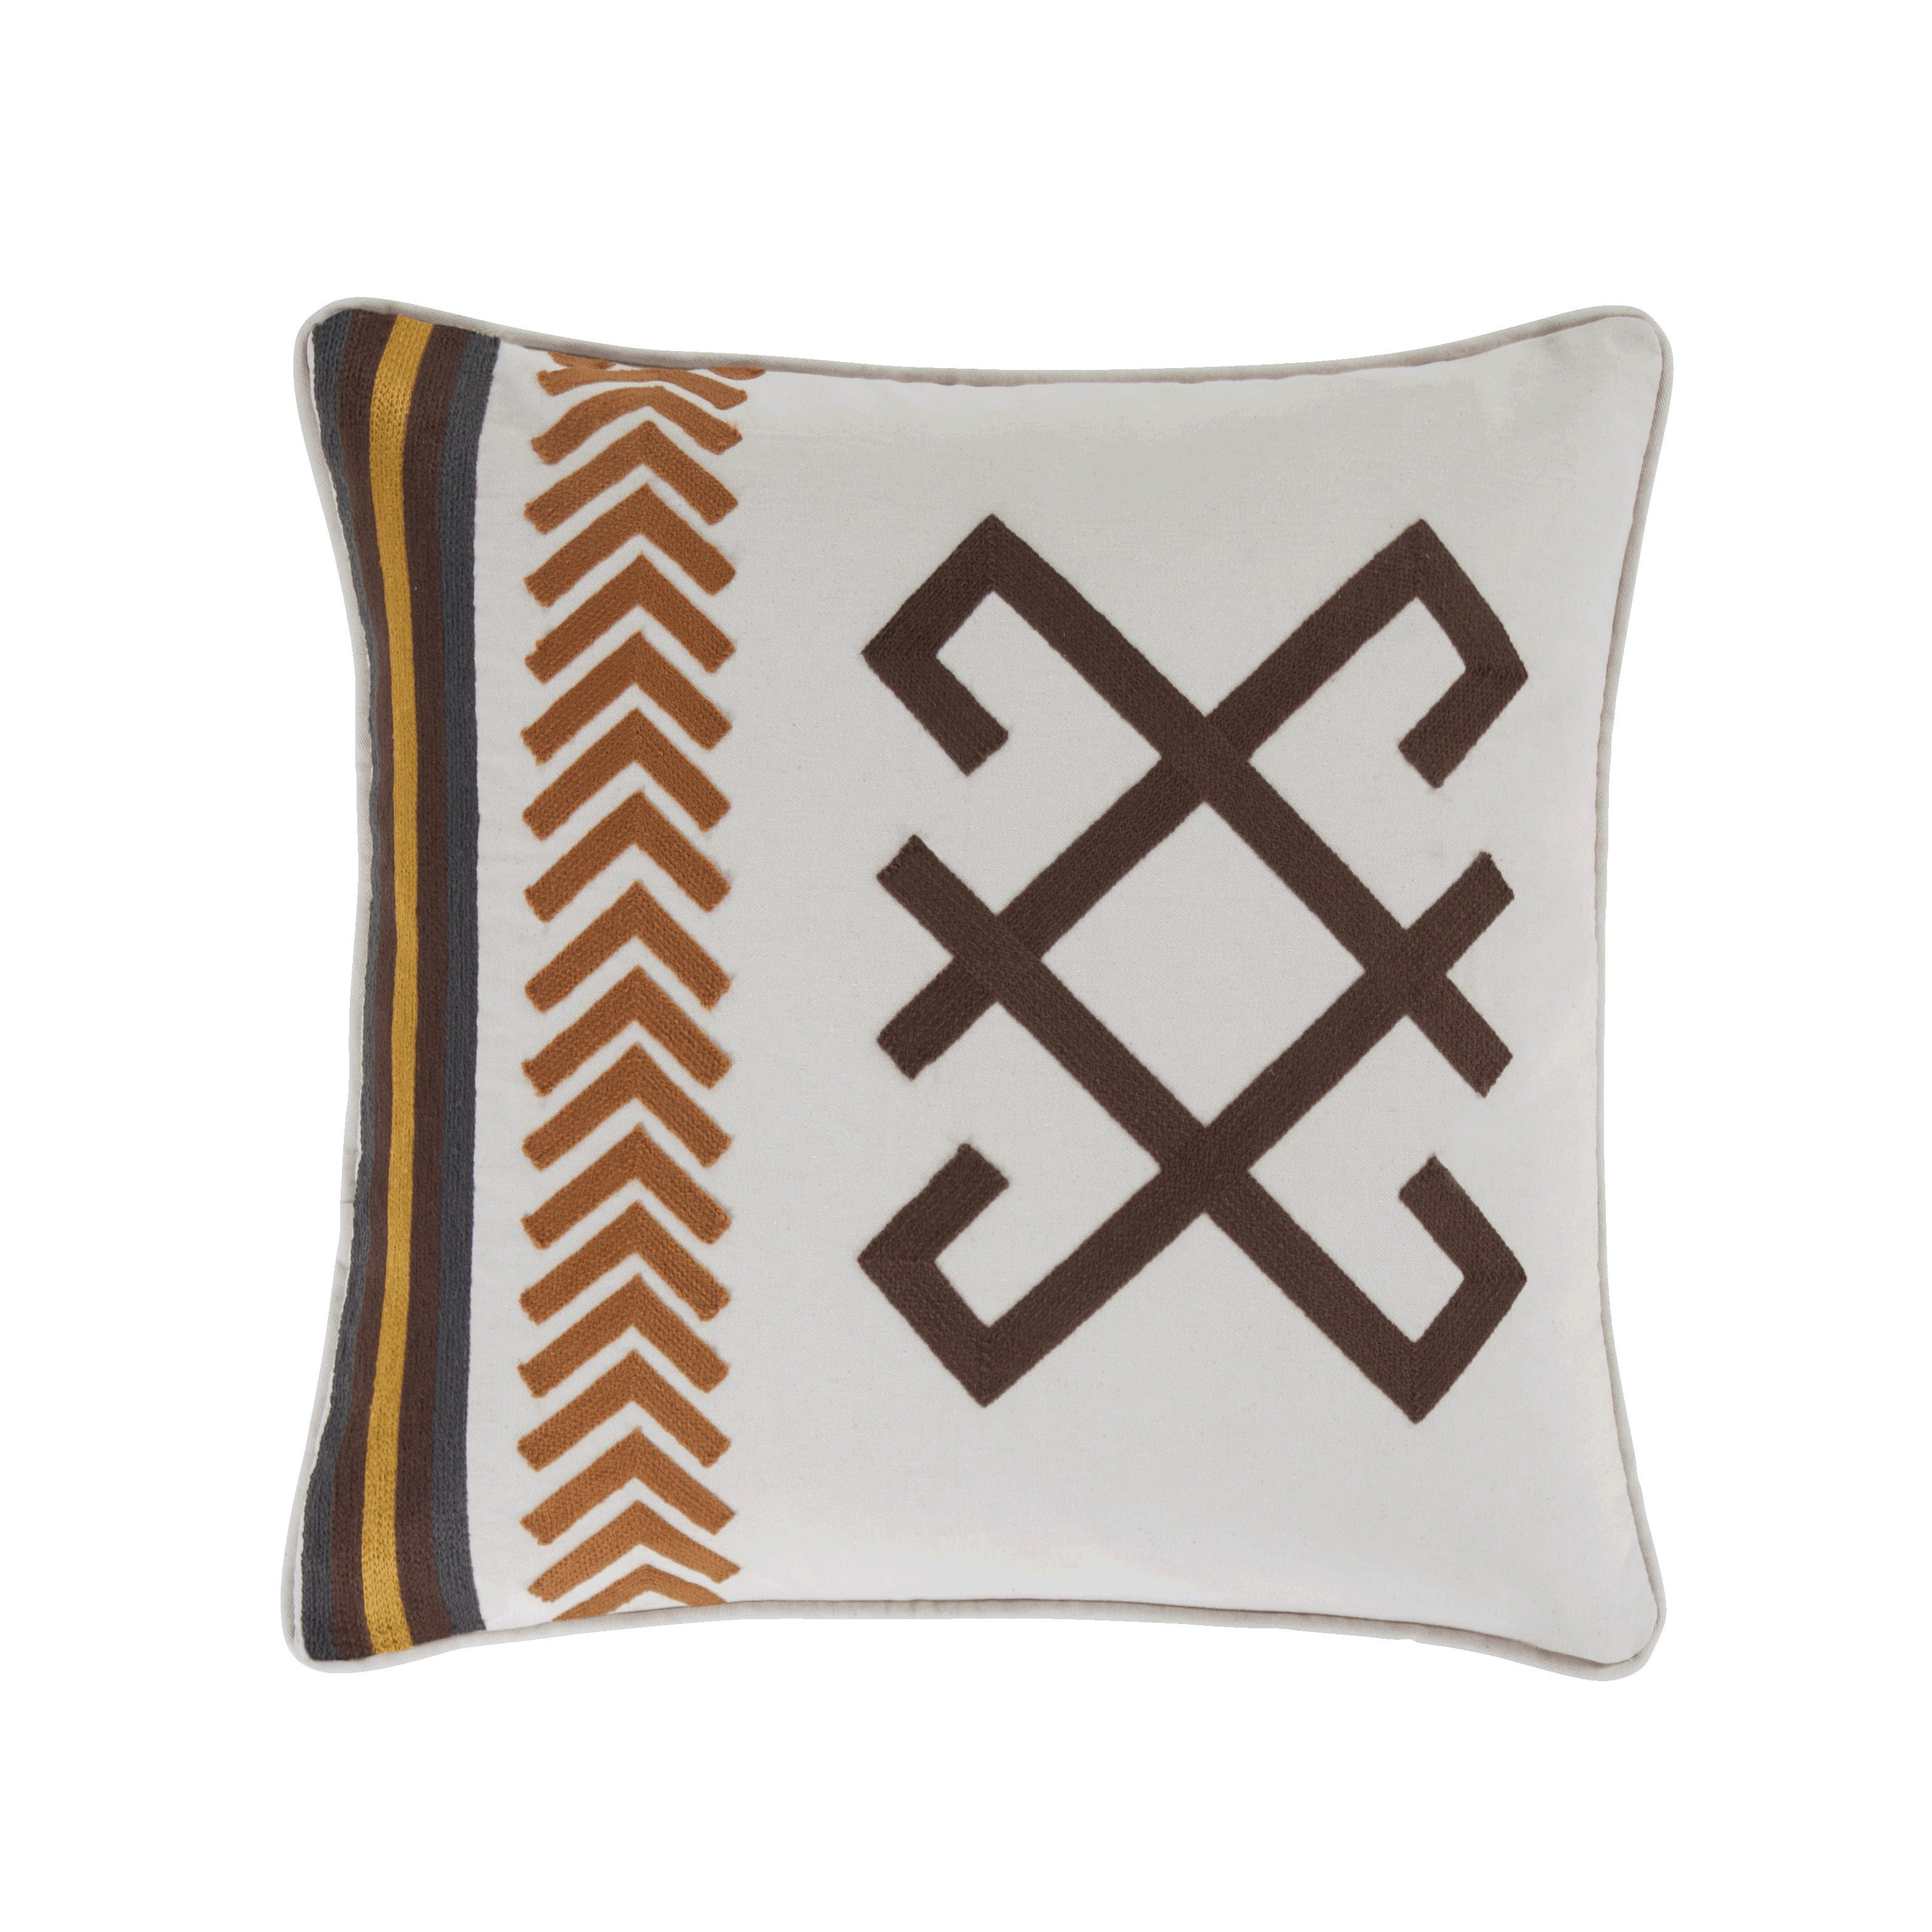 Foundry Select Corozon Canvas Cotton Stripe Embroidered Western Rustic  Lodge Style 18 x 18 inch Decorative Pillow